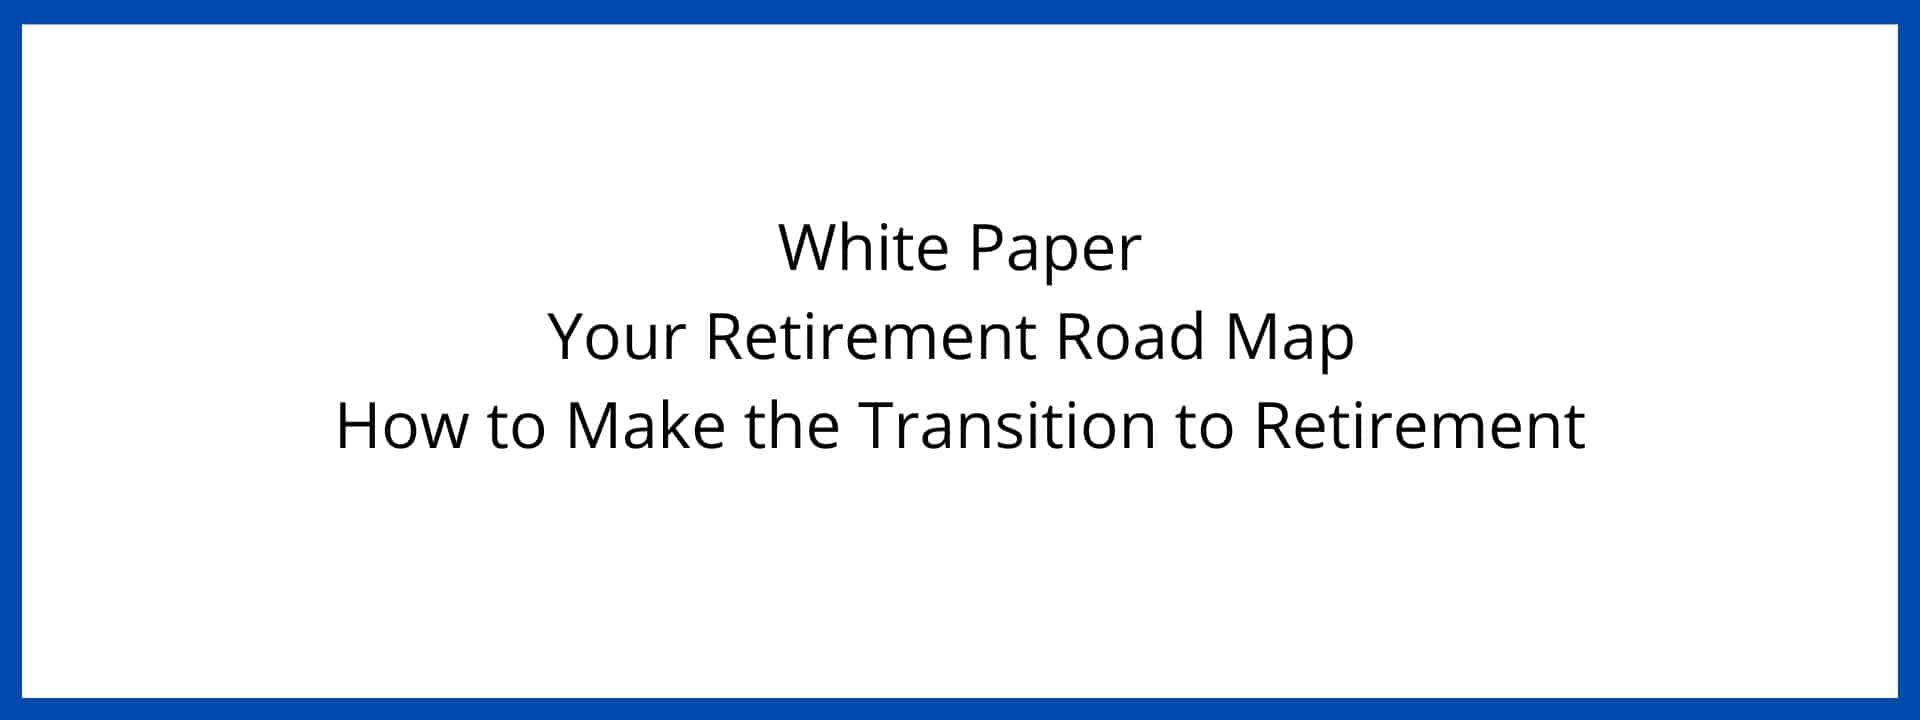 Transition to Retirement